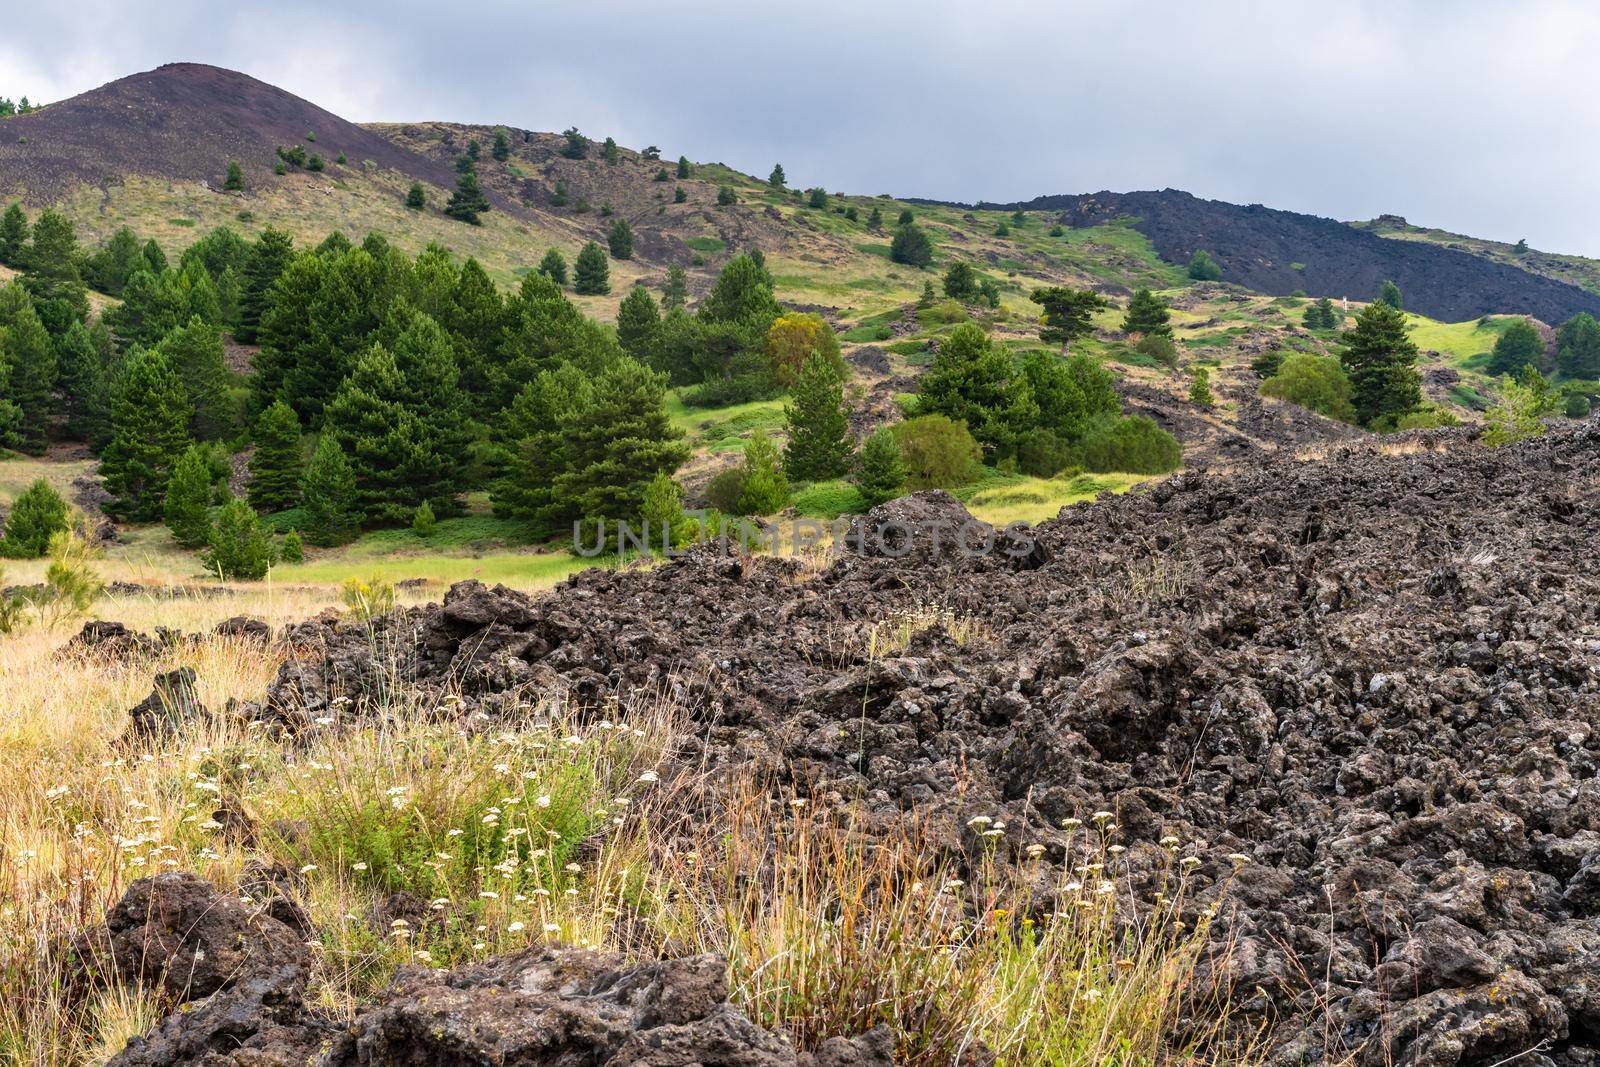 View of Etna volcano landscape among the clouds near Rifugio Sapienza. The typical summer vegetation and flowers partially cover the lava flow. Sicily, Italy